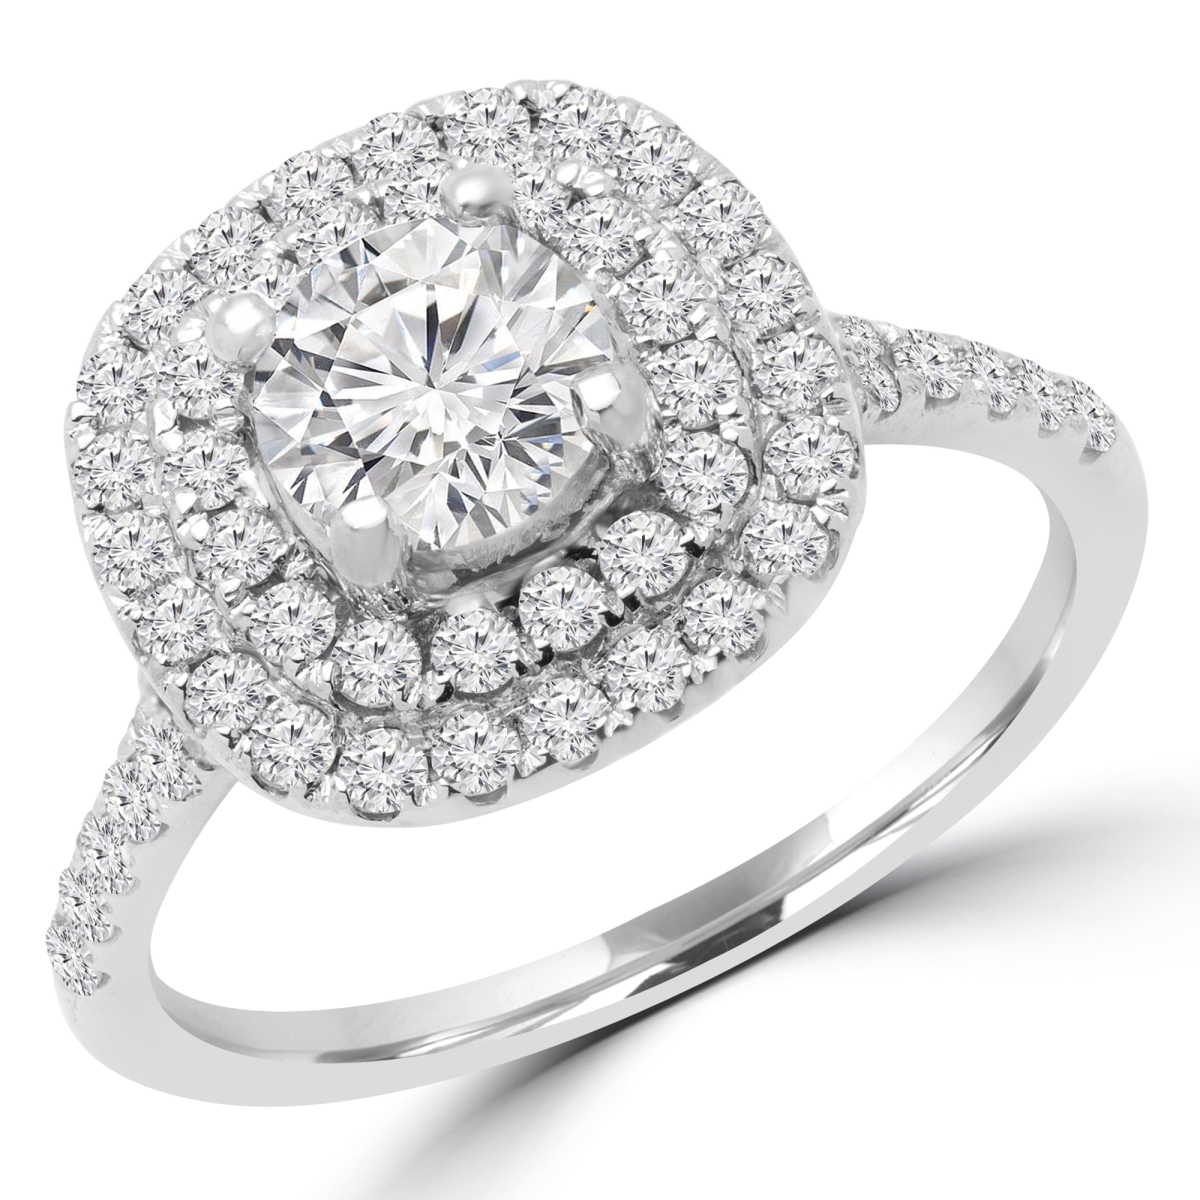 Picture of Majesty Diamonds MD170293-7.75 1.4 CTW Round Diamond Double Halo Engagement Ring in 14K White Gold - Size 7.75